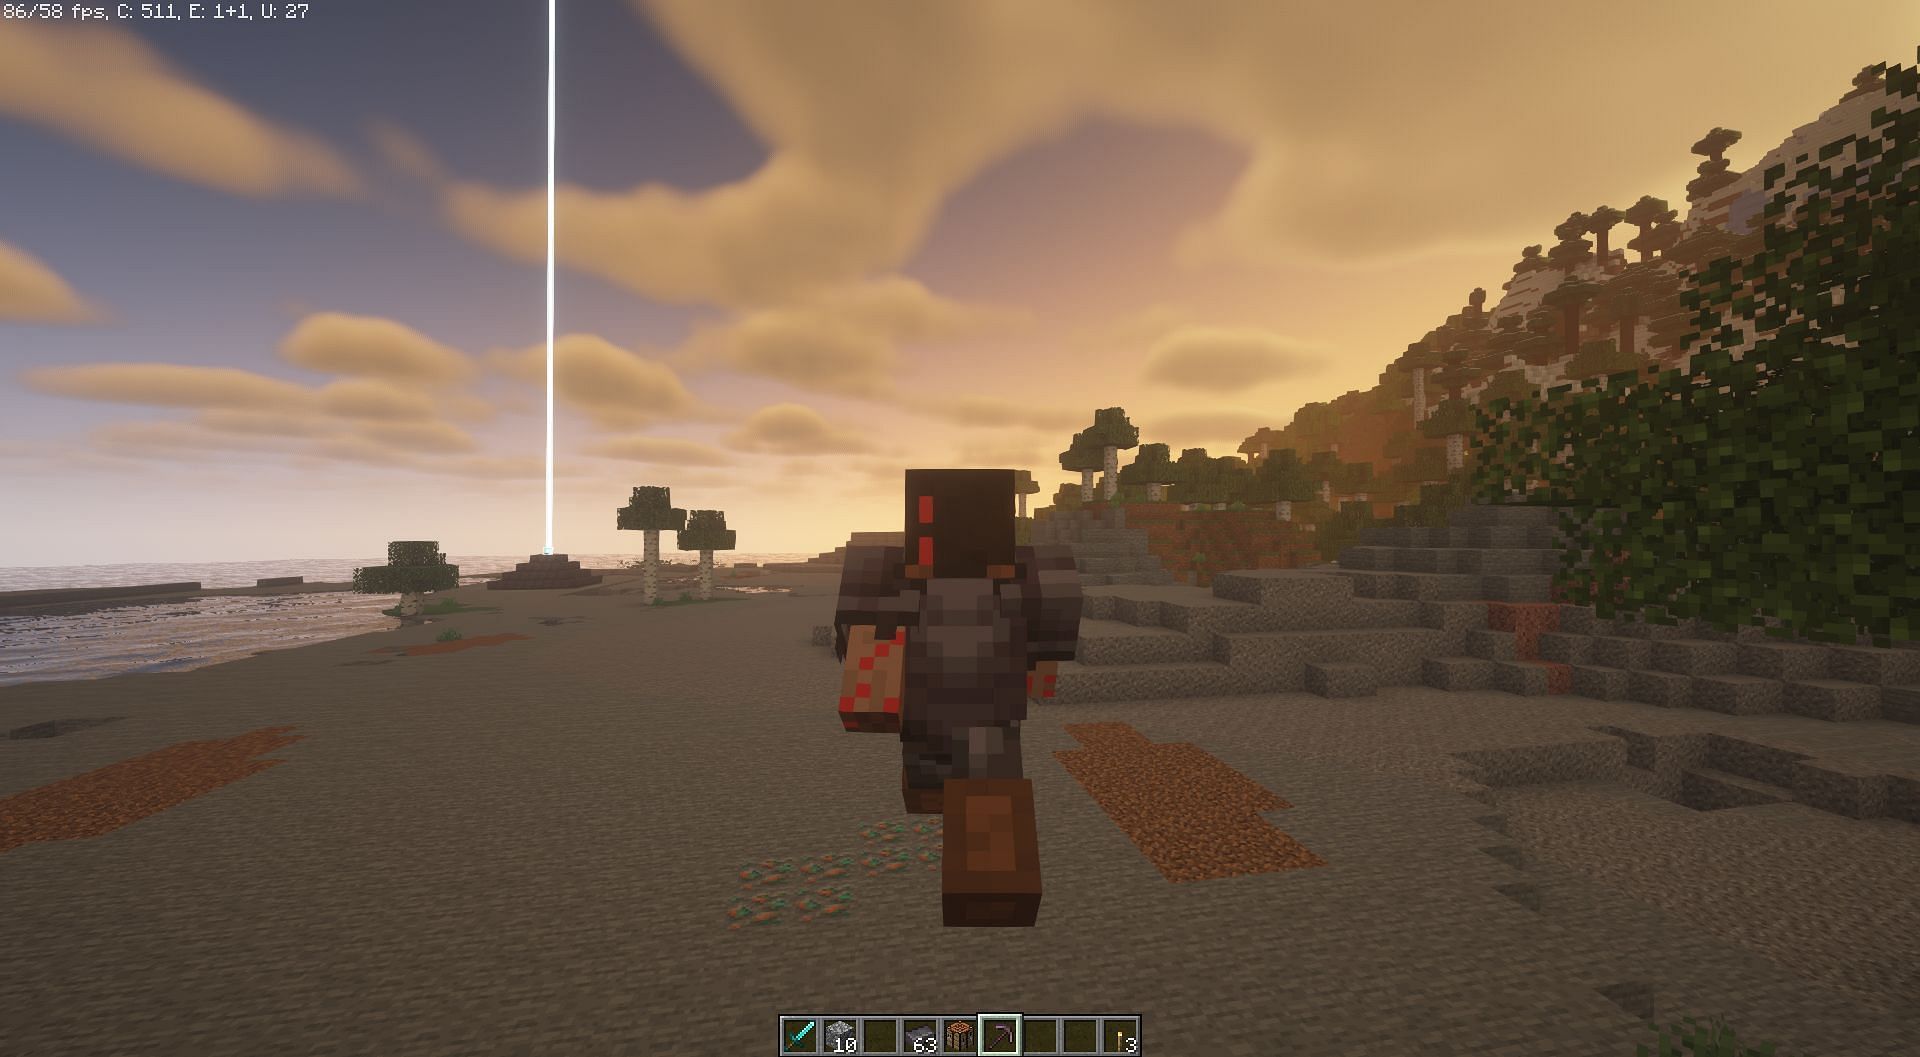 Players can use shaders with OptiFine in the game (Image via Mojang)